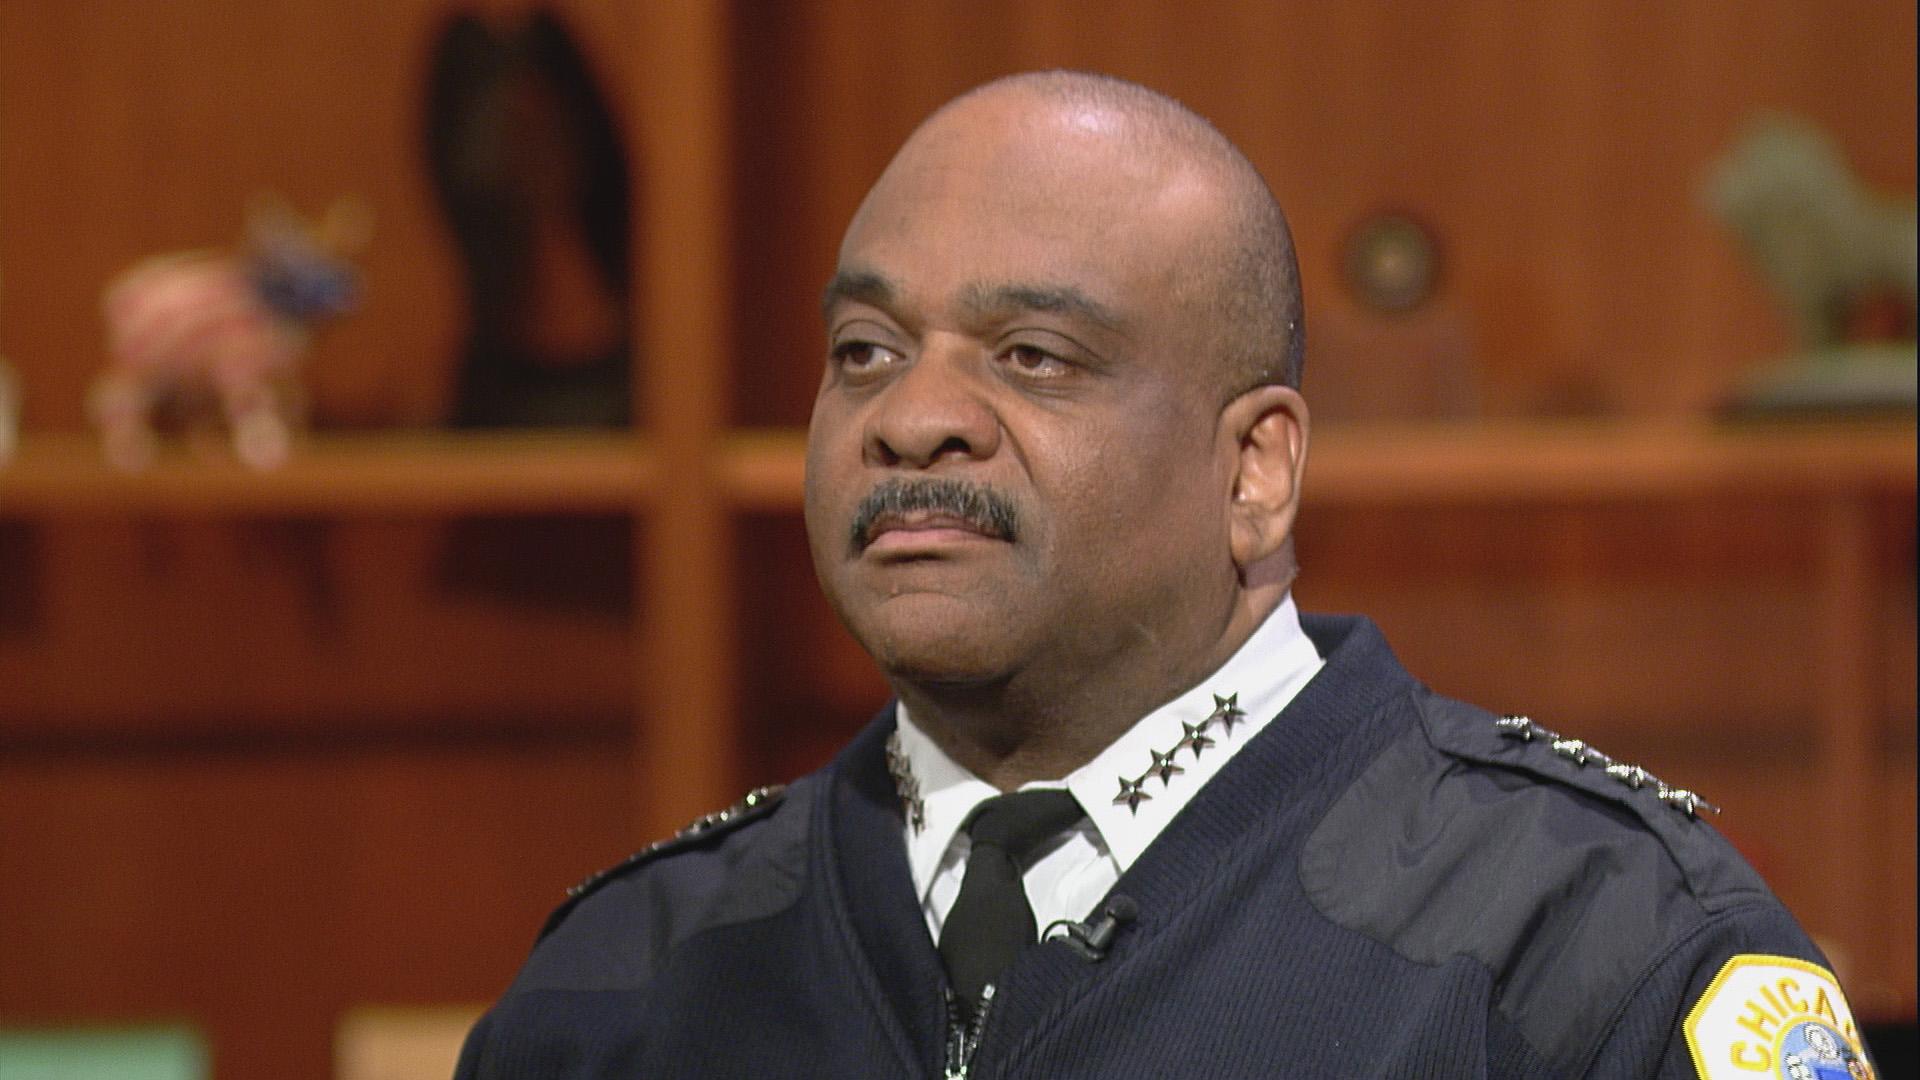 Chicago Police Superintendent Eddie Johnson appears on “Chicago Tonight” on March 14, 2017. (WTTW News)